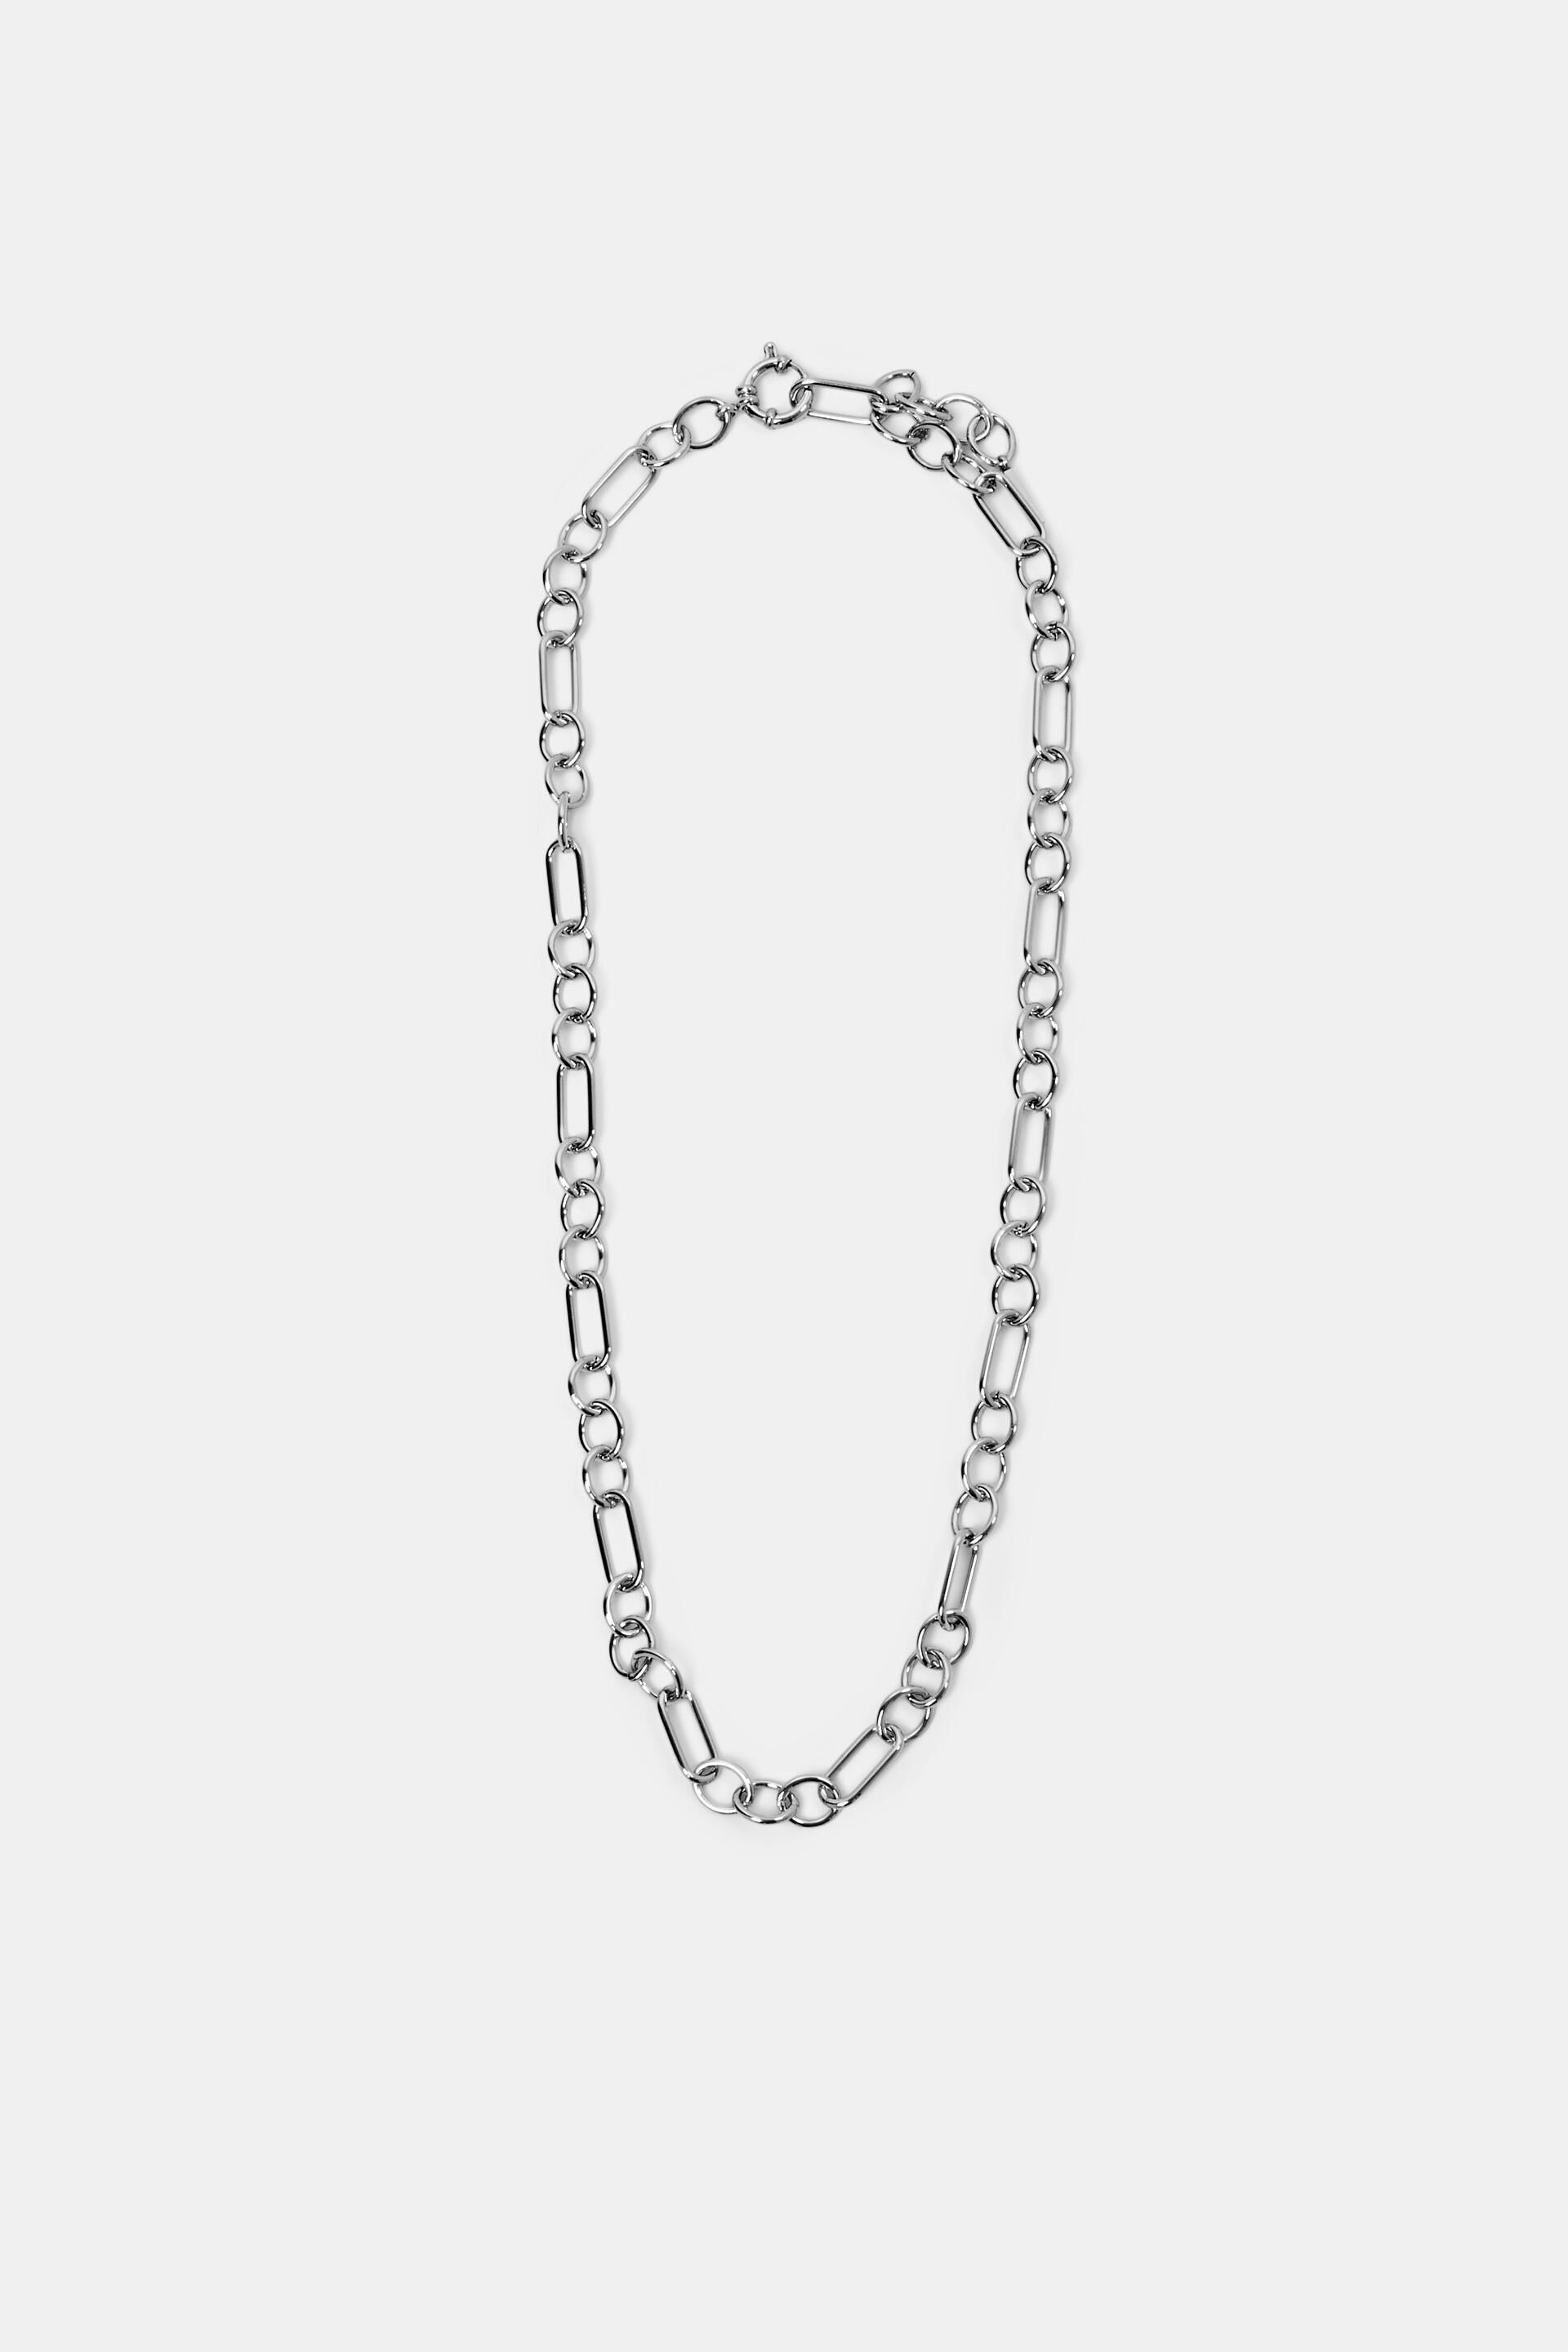 Esprit Online Store Chain necklace, stainless steel